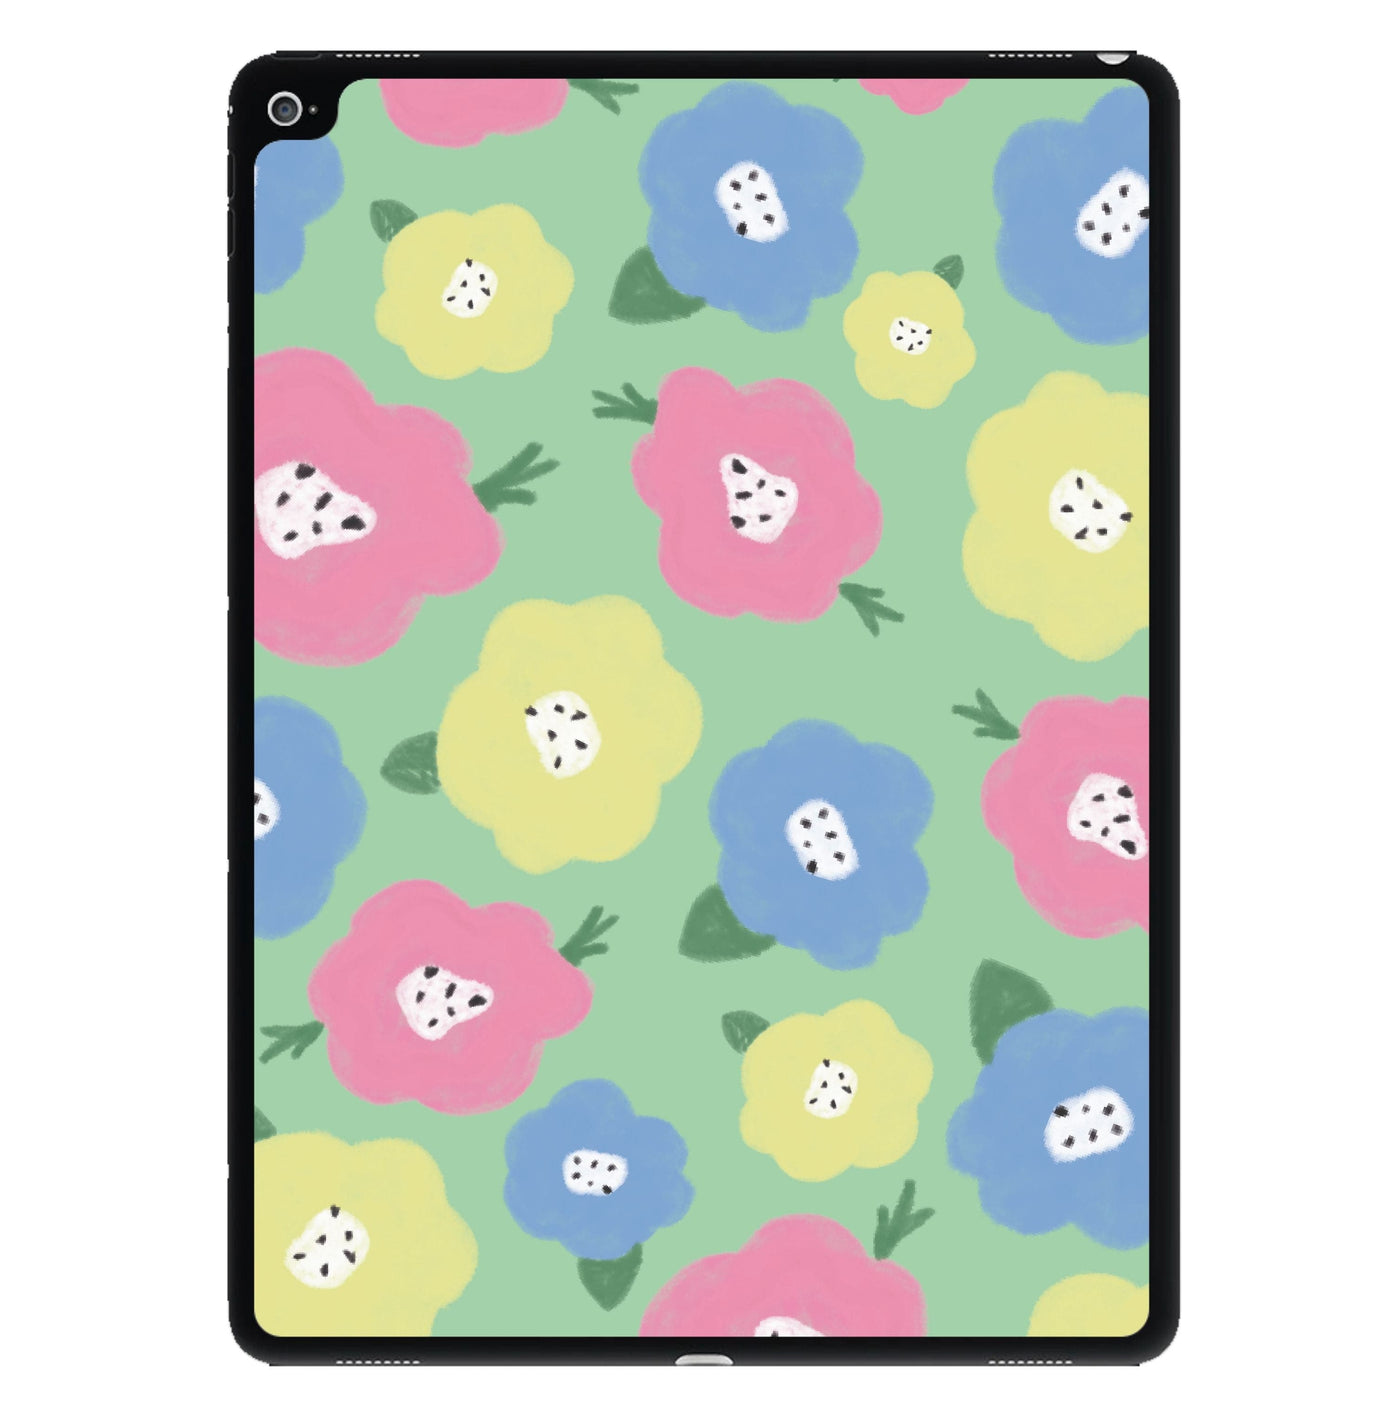 Painted Flowers - Floral Patterns iPad Case